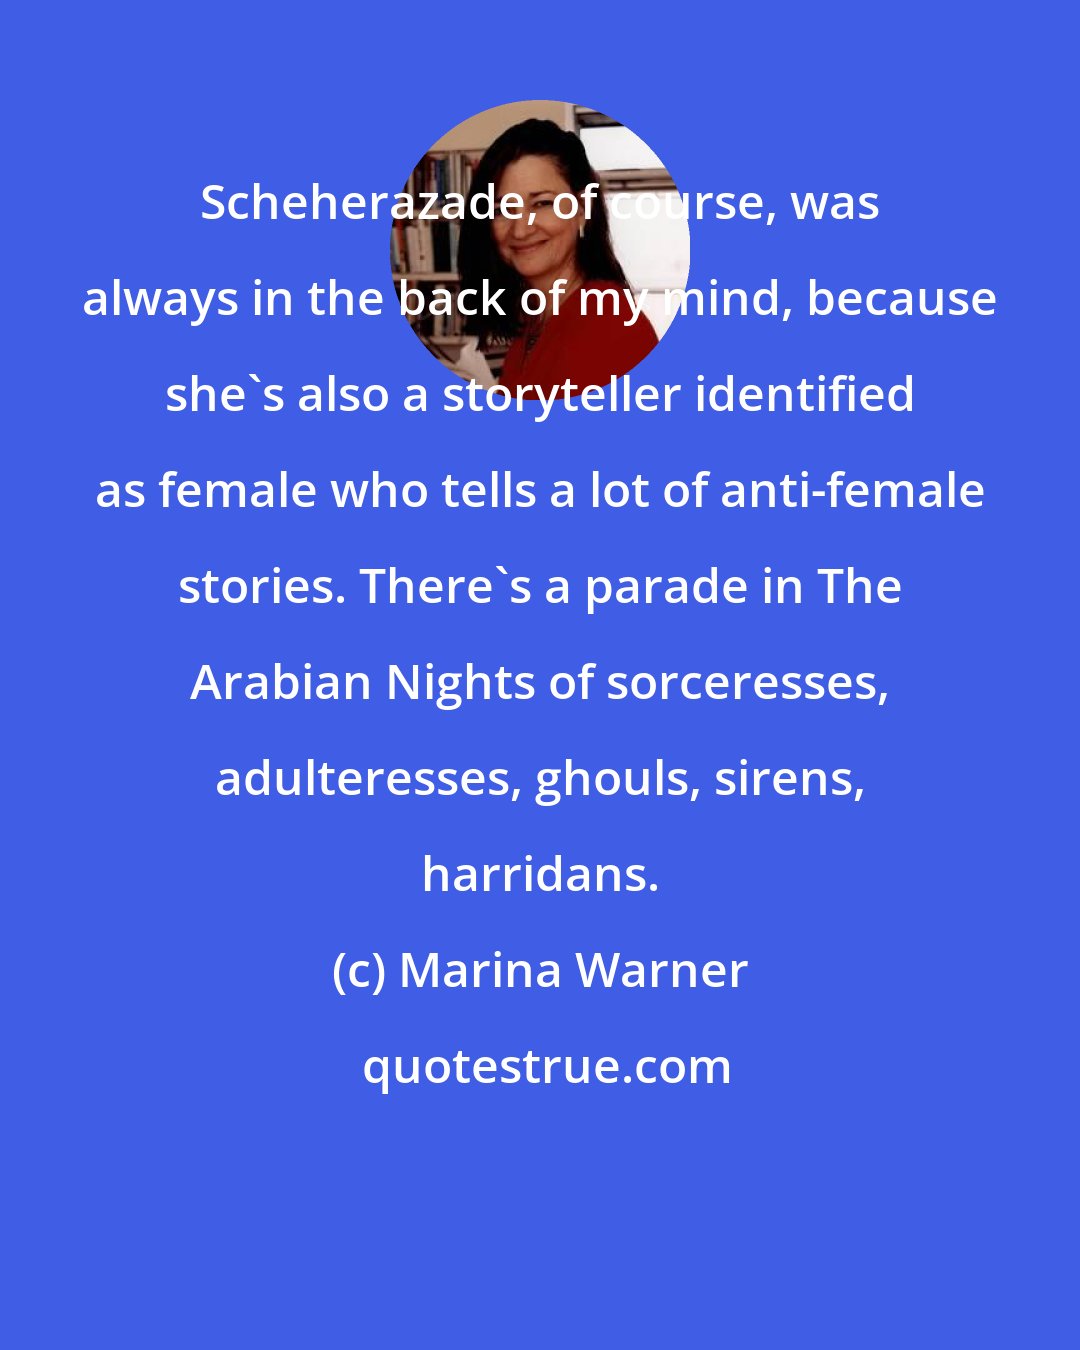 Marina Warner: Scheherazade, of course, was always in the back of my mind, because she's also a storyteller identified as female who tells a lot of anti-female stories. There's a parade in The Arabian Nights of sorceresses, adulteresses, ghouls, sirens, harridans.